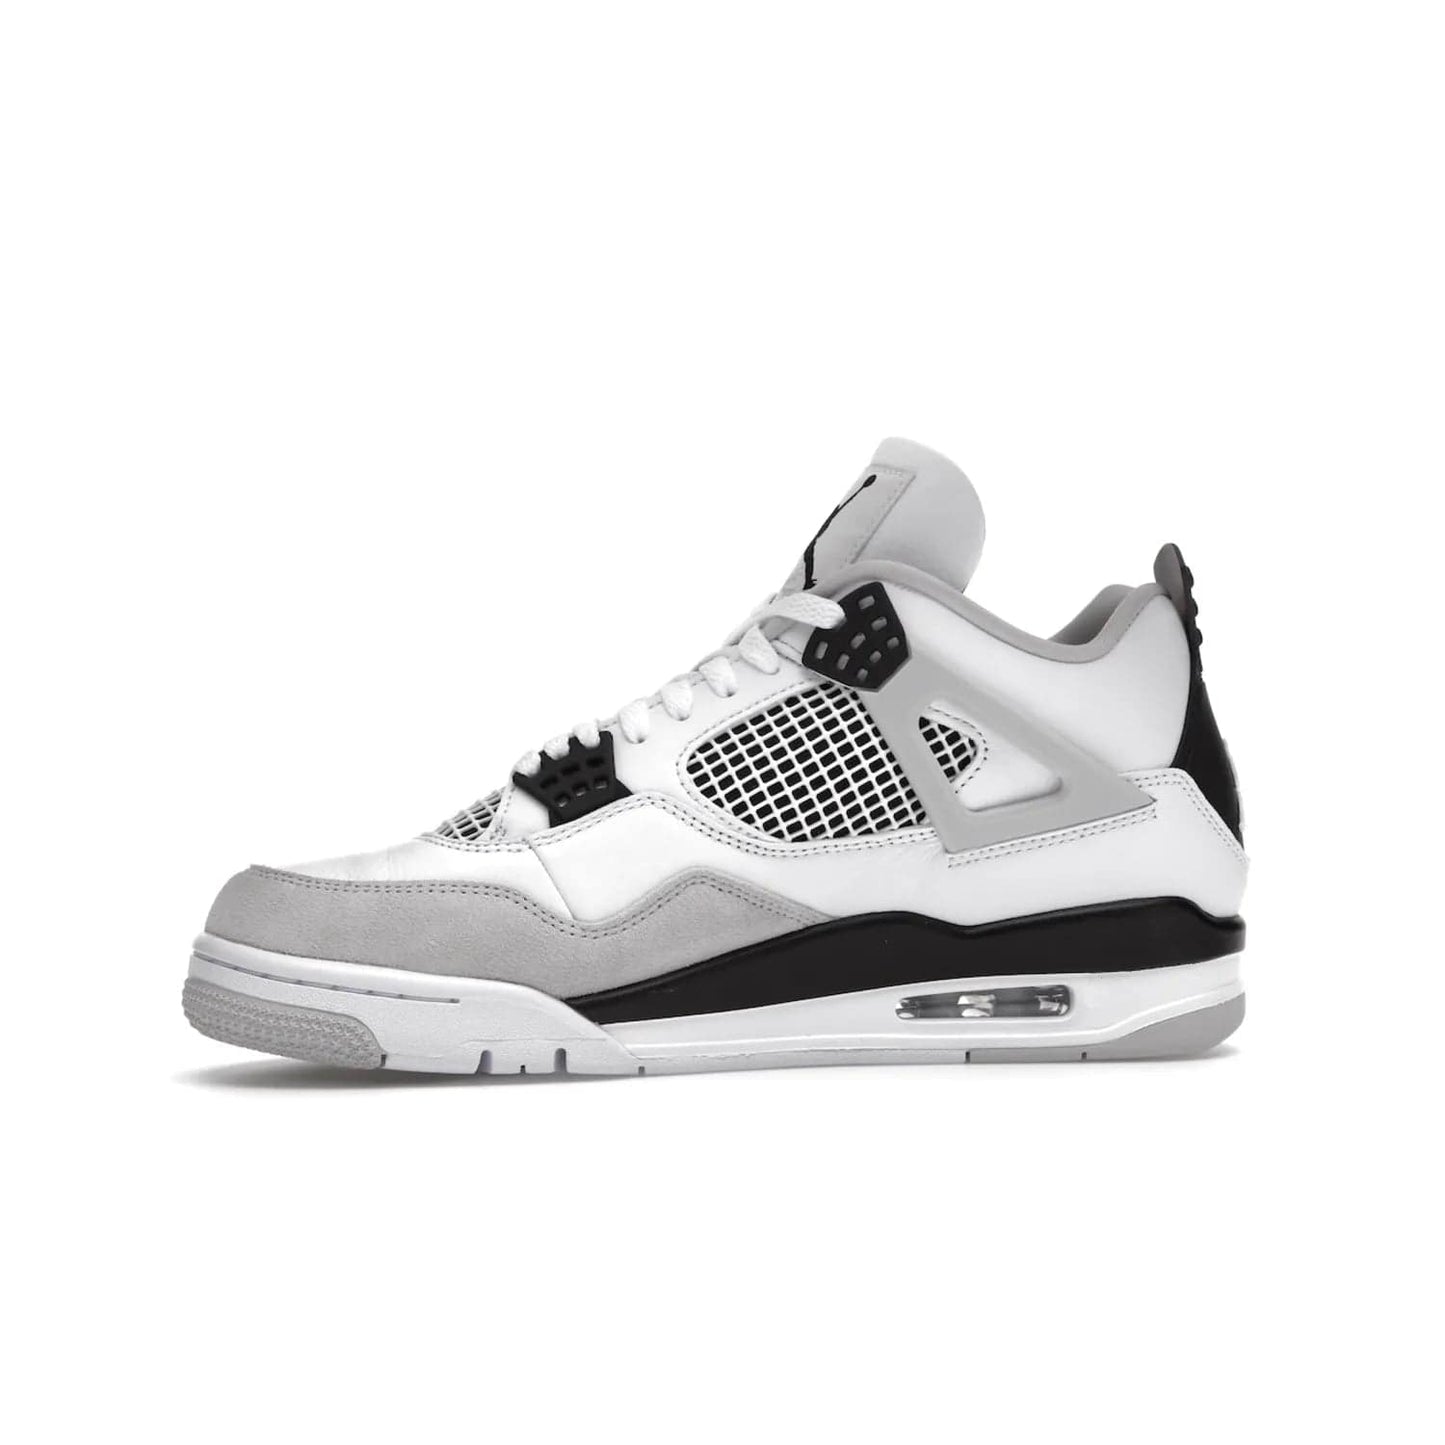 Jordan 4 Retro Military Black - Image 18 - Only at www.BallersClubKickz.com - Updated Air Jordan 4 style with a white/black/light grey sole and visible Air unit. Released in May 2022, offering timeless classic style and comfort.